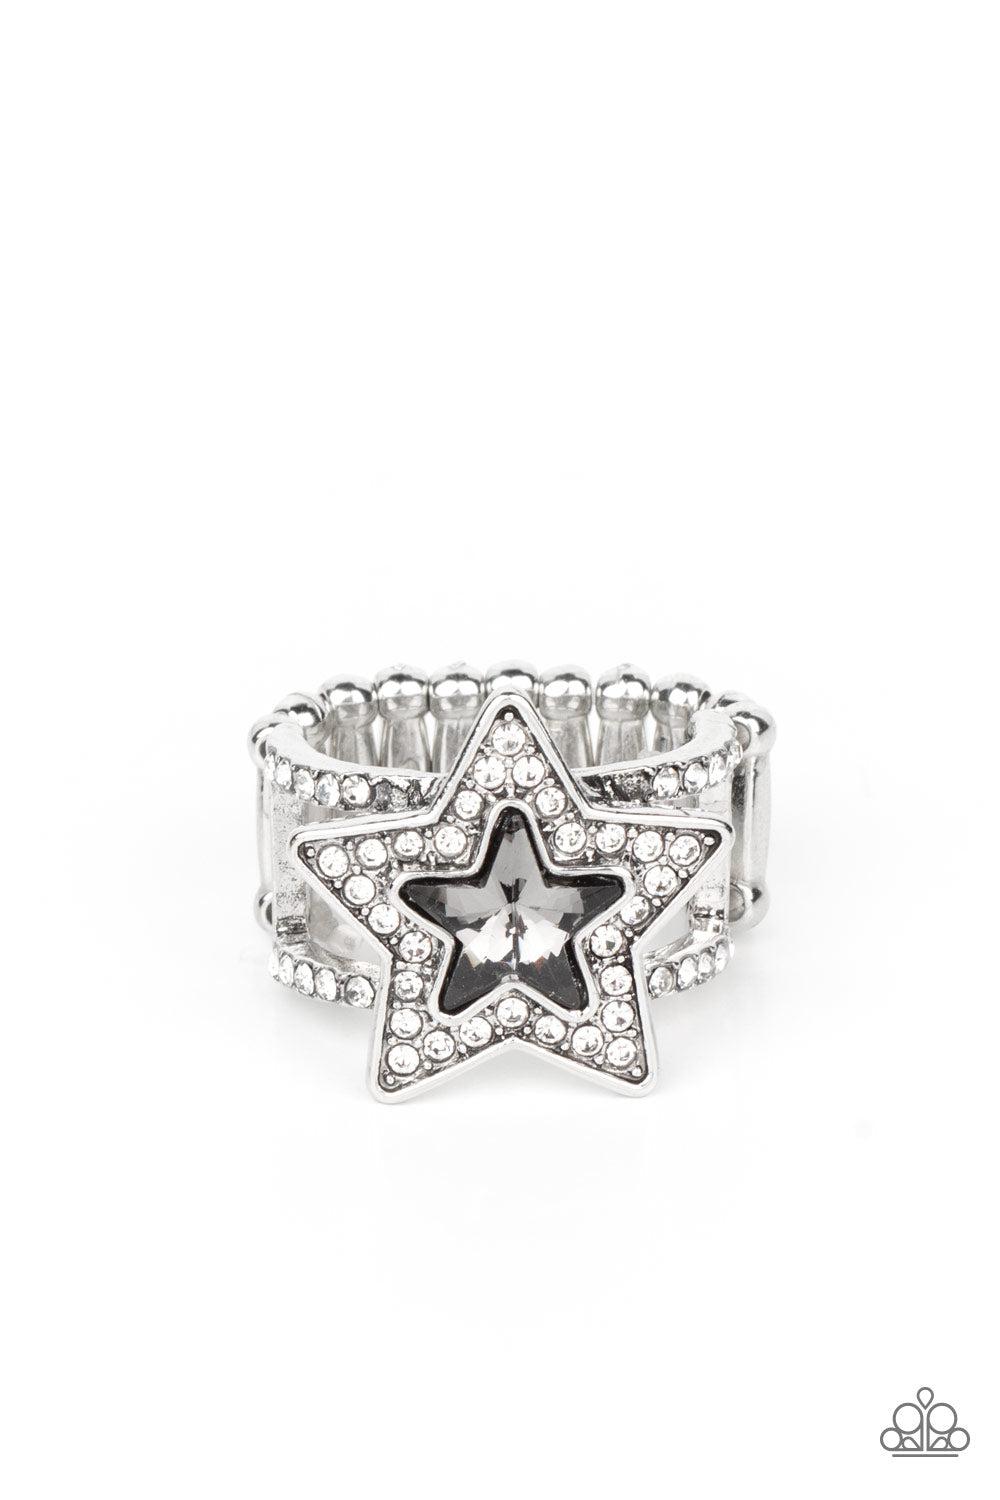 One Nation Under Sparkle Silver & White Rhinestone Star Ring - Paparazzi Accessories- lightbox - CarasShop.com - $5 Jewelry by Cara Jewels